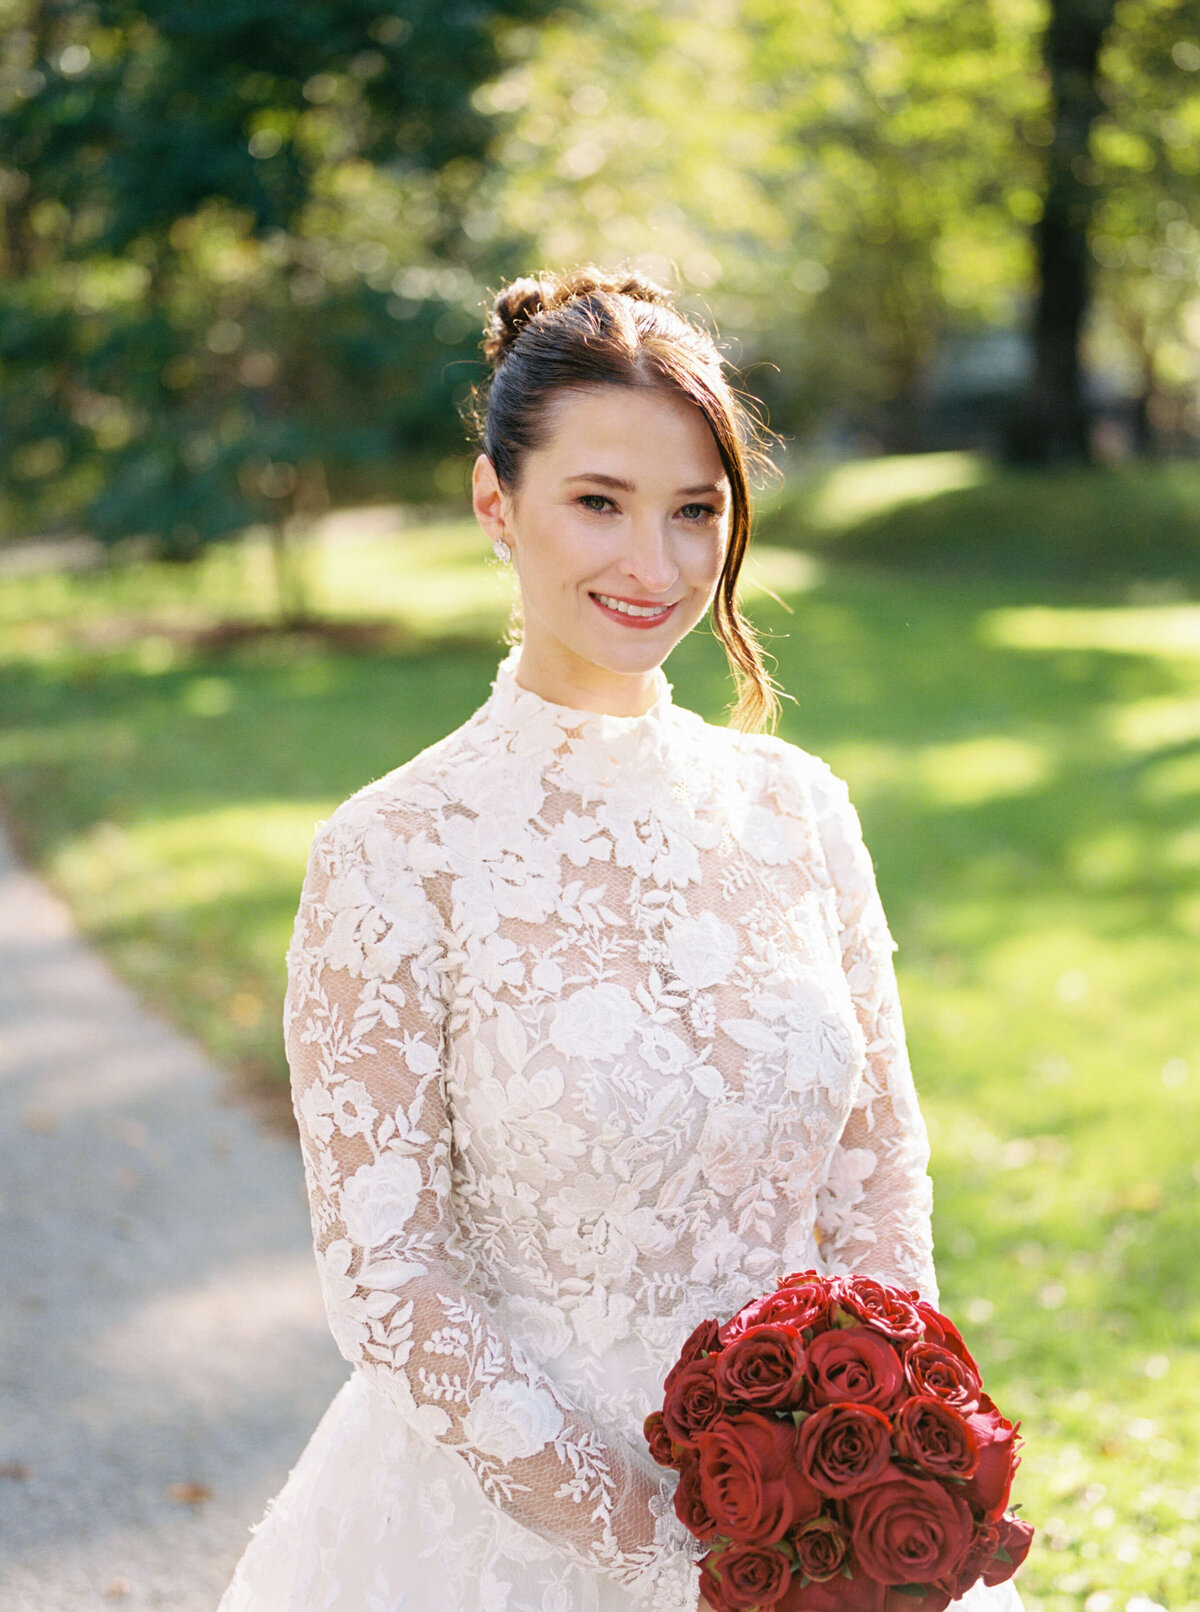 Bride wearing lace dress and carrying red bouquet by Halifax wedding photographer, Alyssa Joy Photography